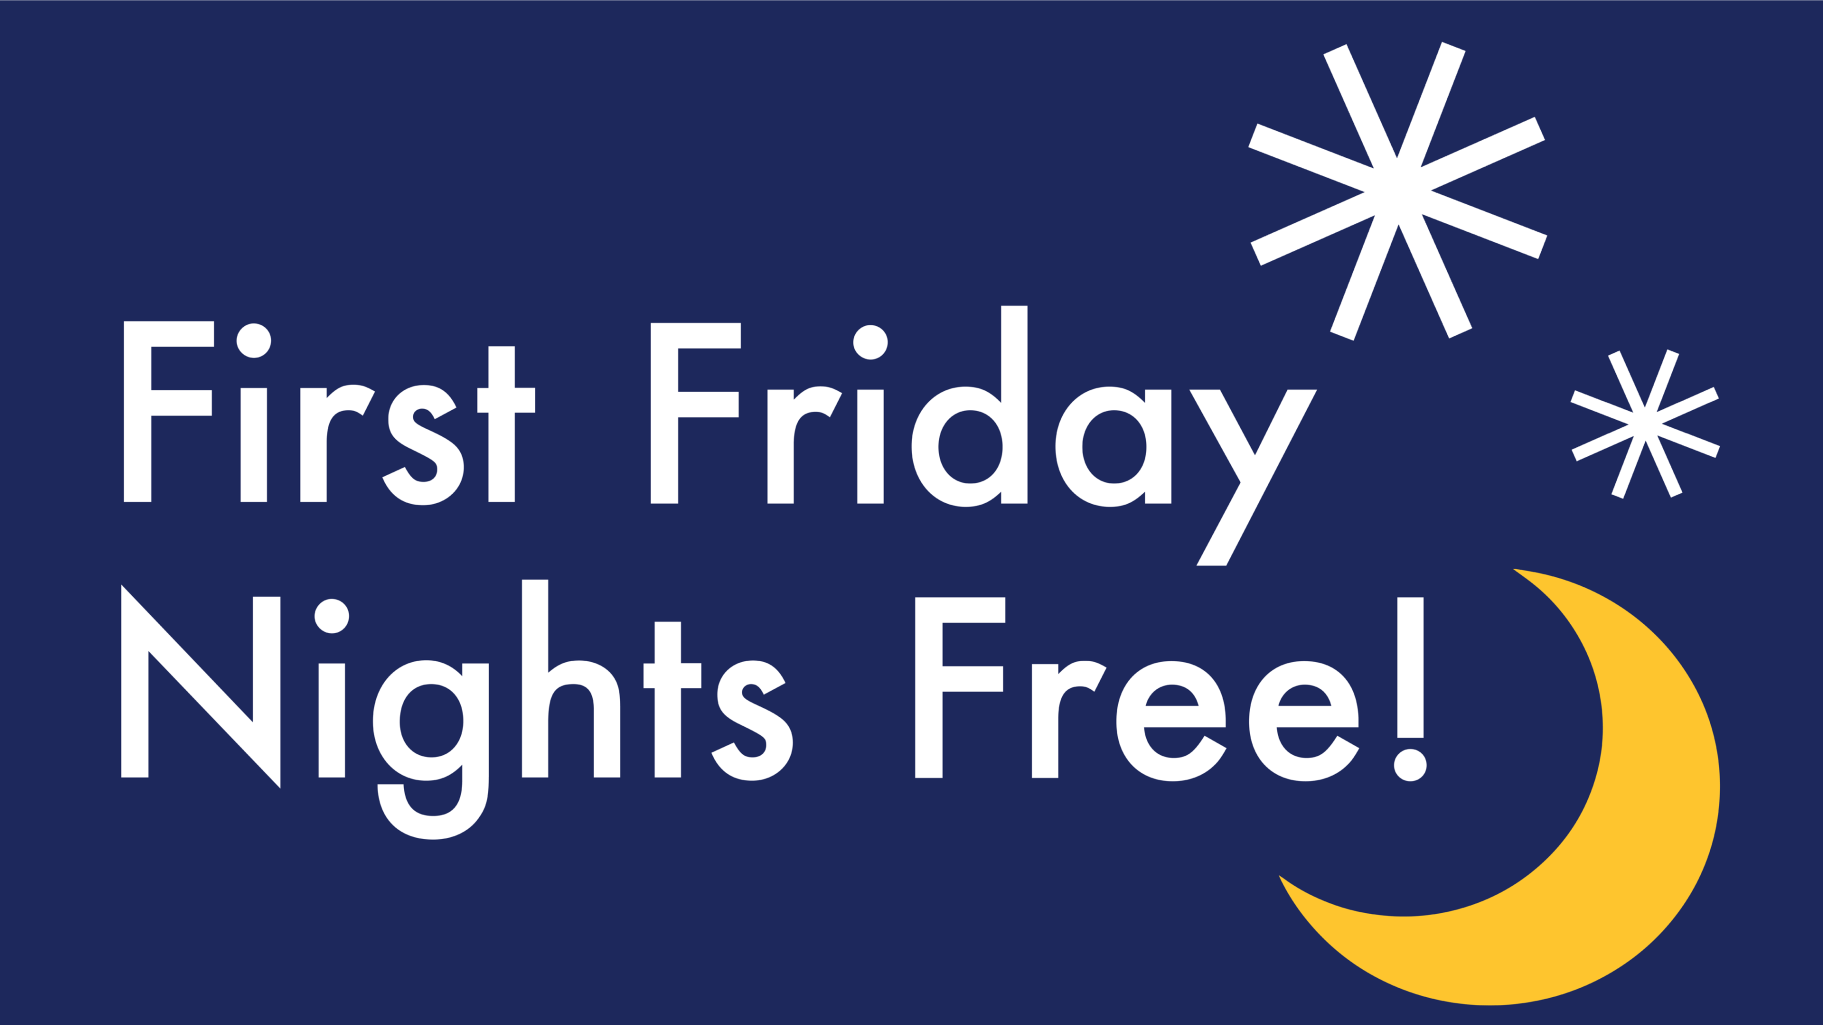 graphic that says First Friday Nights Free! and has a crescent moon